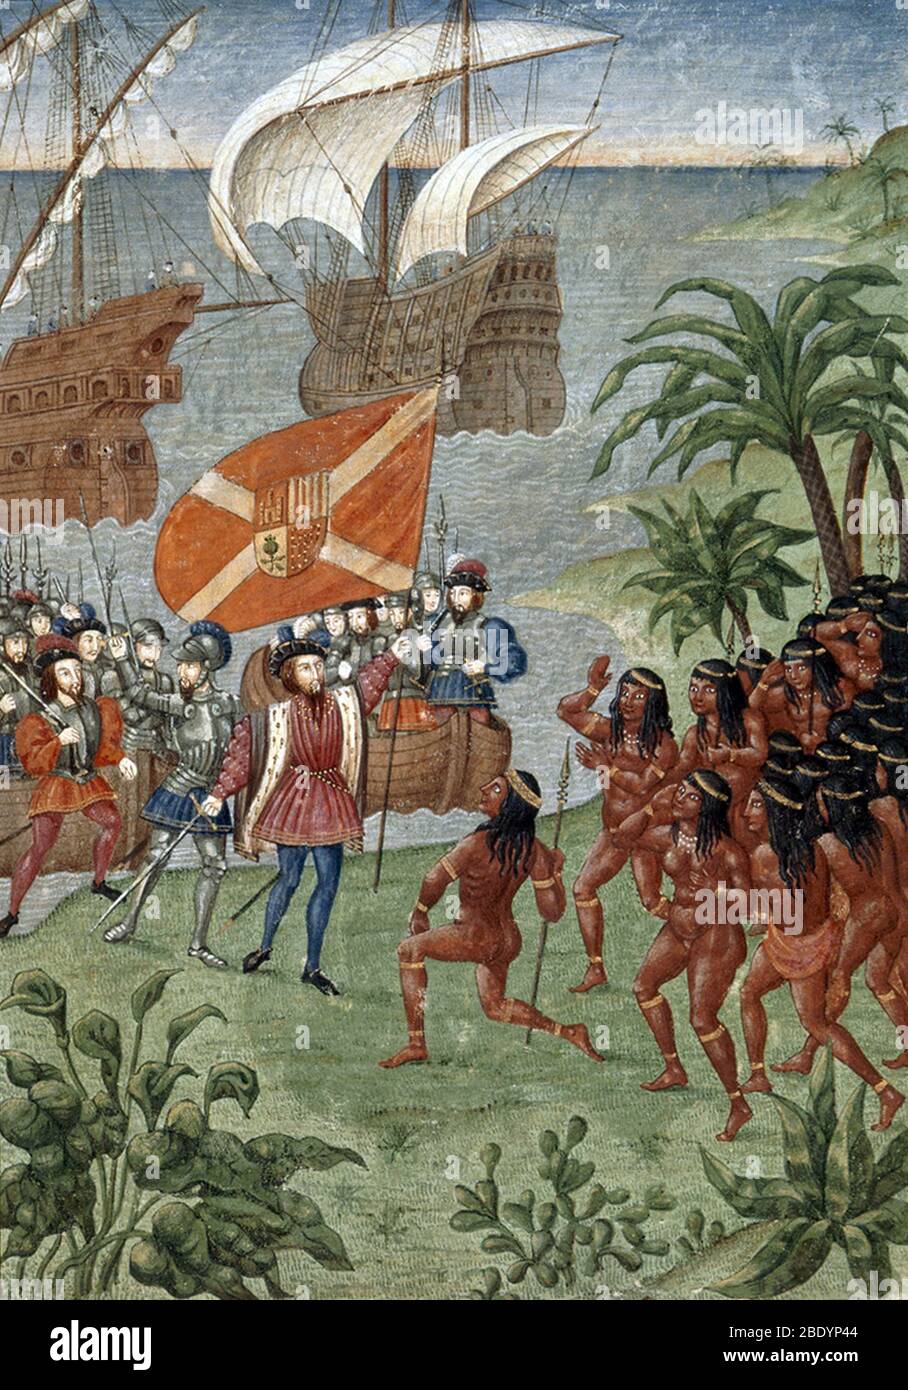 Hern√°n Cort√©s Entering Mexico, 1519 Stock Photo